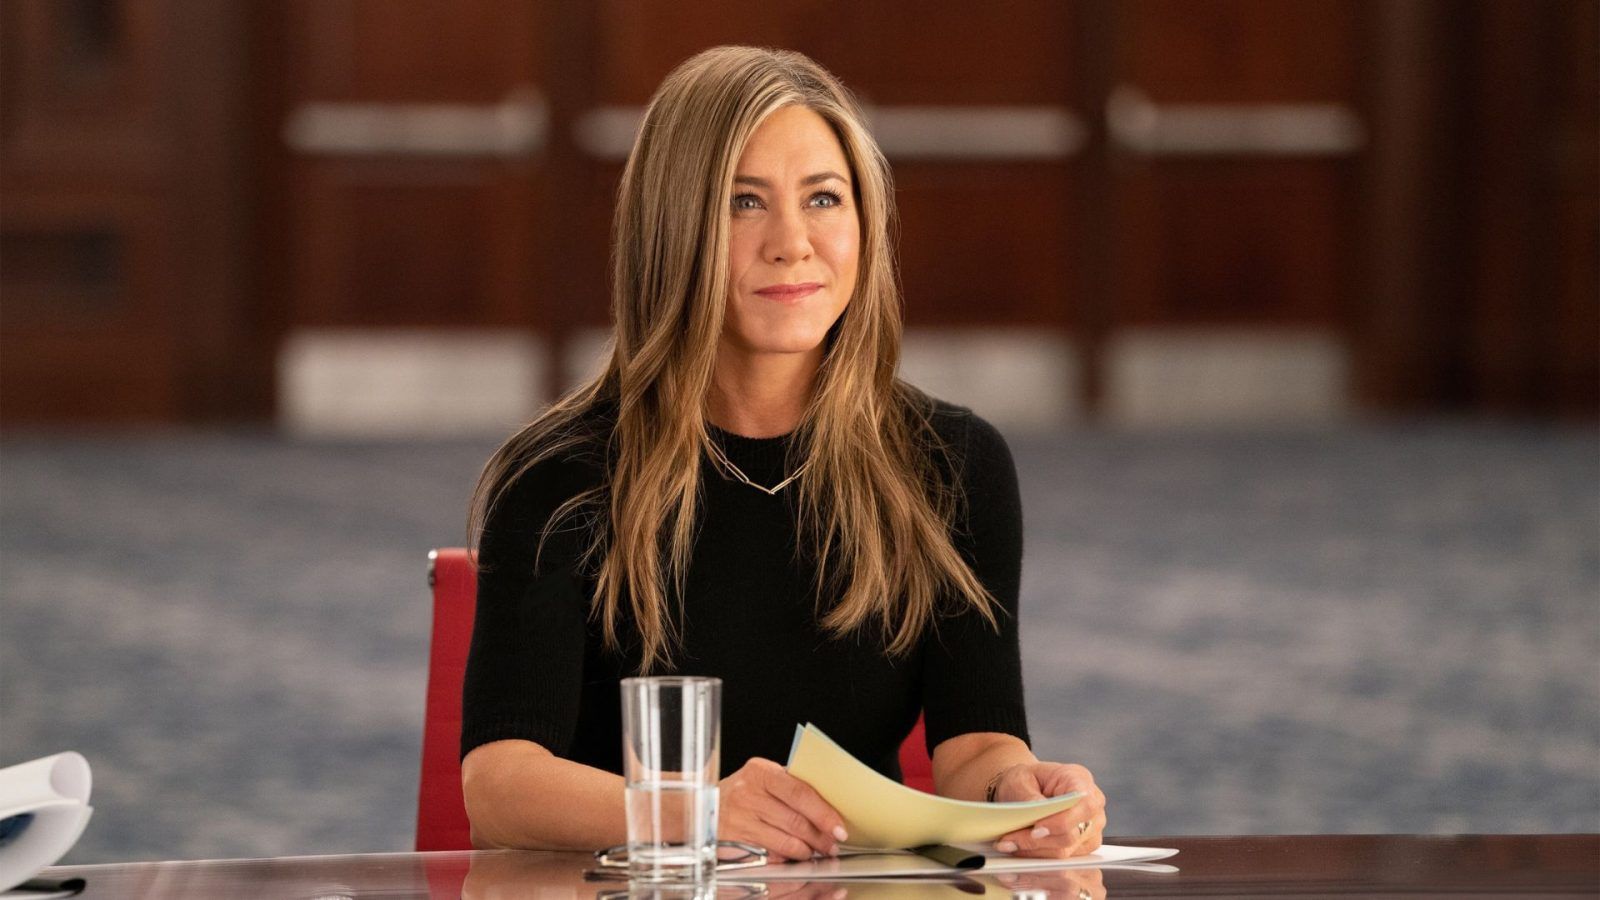 Jennifer Aniston's net worth: Career, Friends salary and things she owns